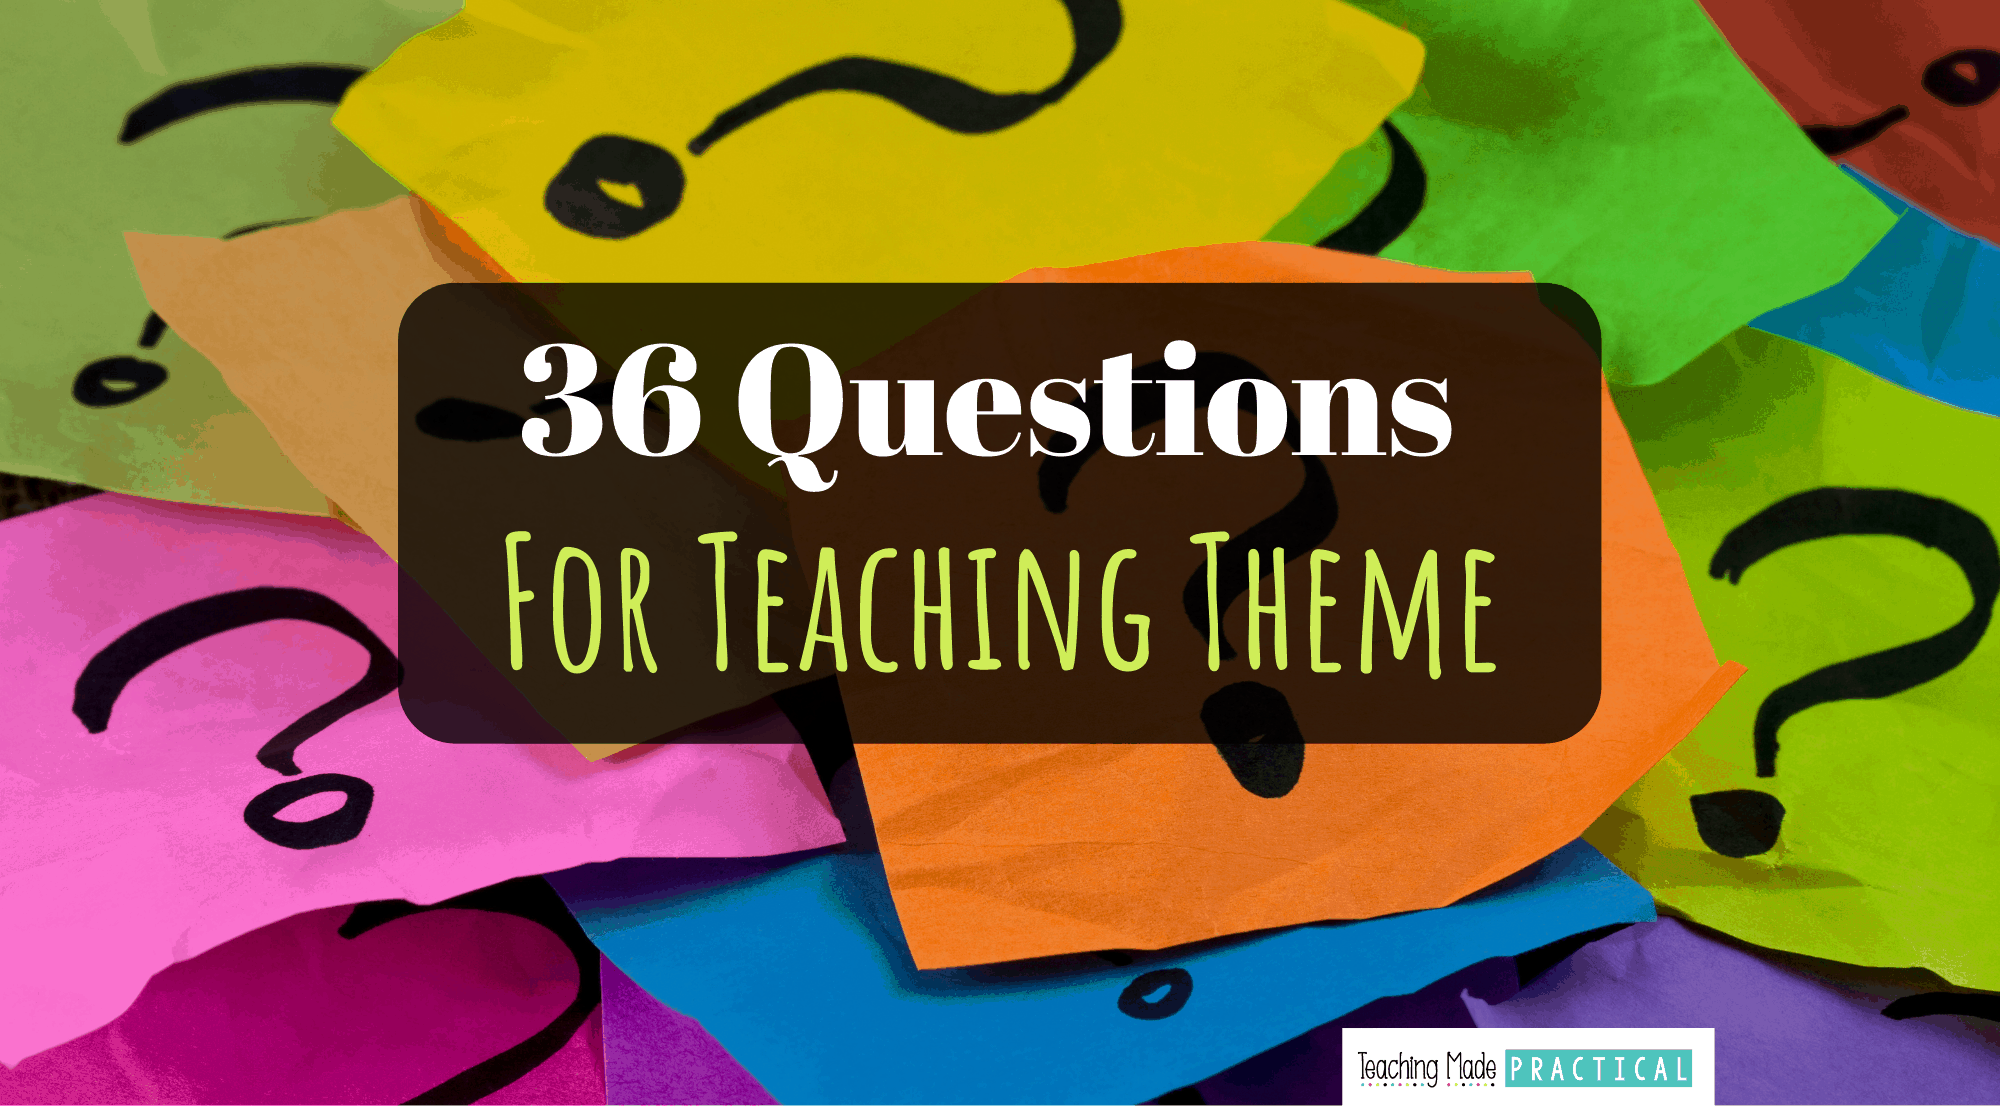 Questions for teaching theme to third, fourth, and fifth grade students - promote higher level thinking 